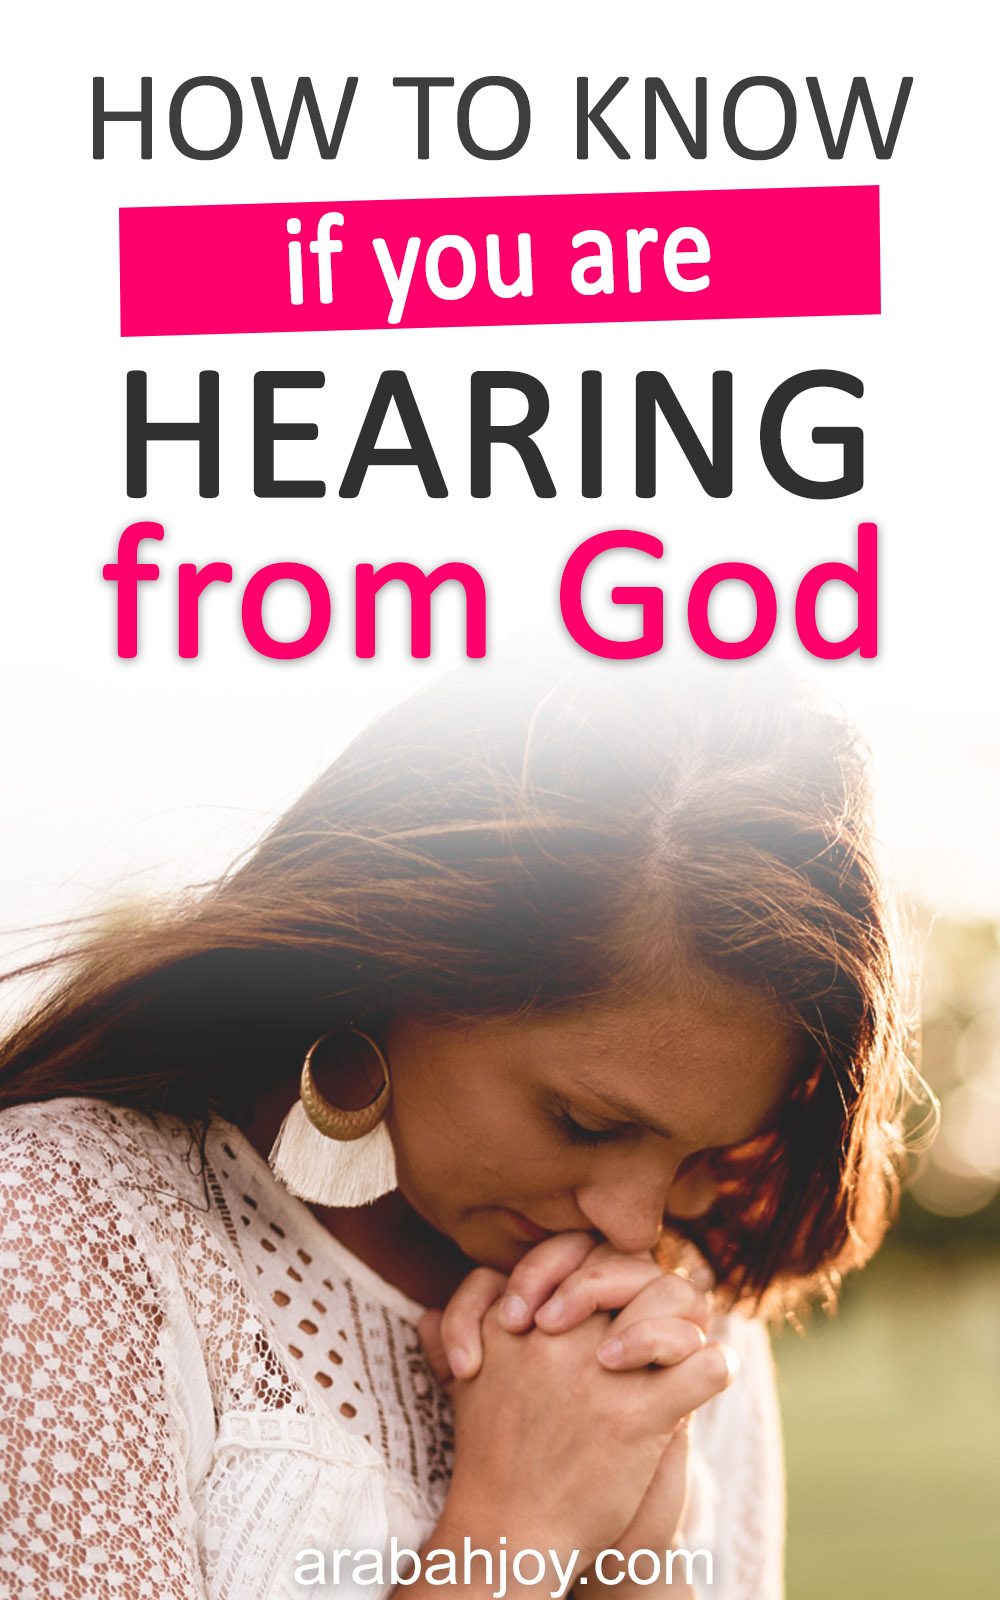 Have you ever wondered how to hear God's voice? Or if what you are hearing is God's voice or your own? Here are 4 tips for knowing how to hear the voice of God